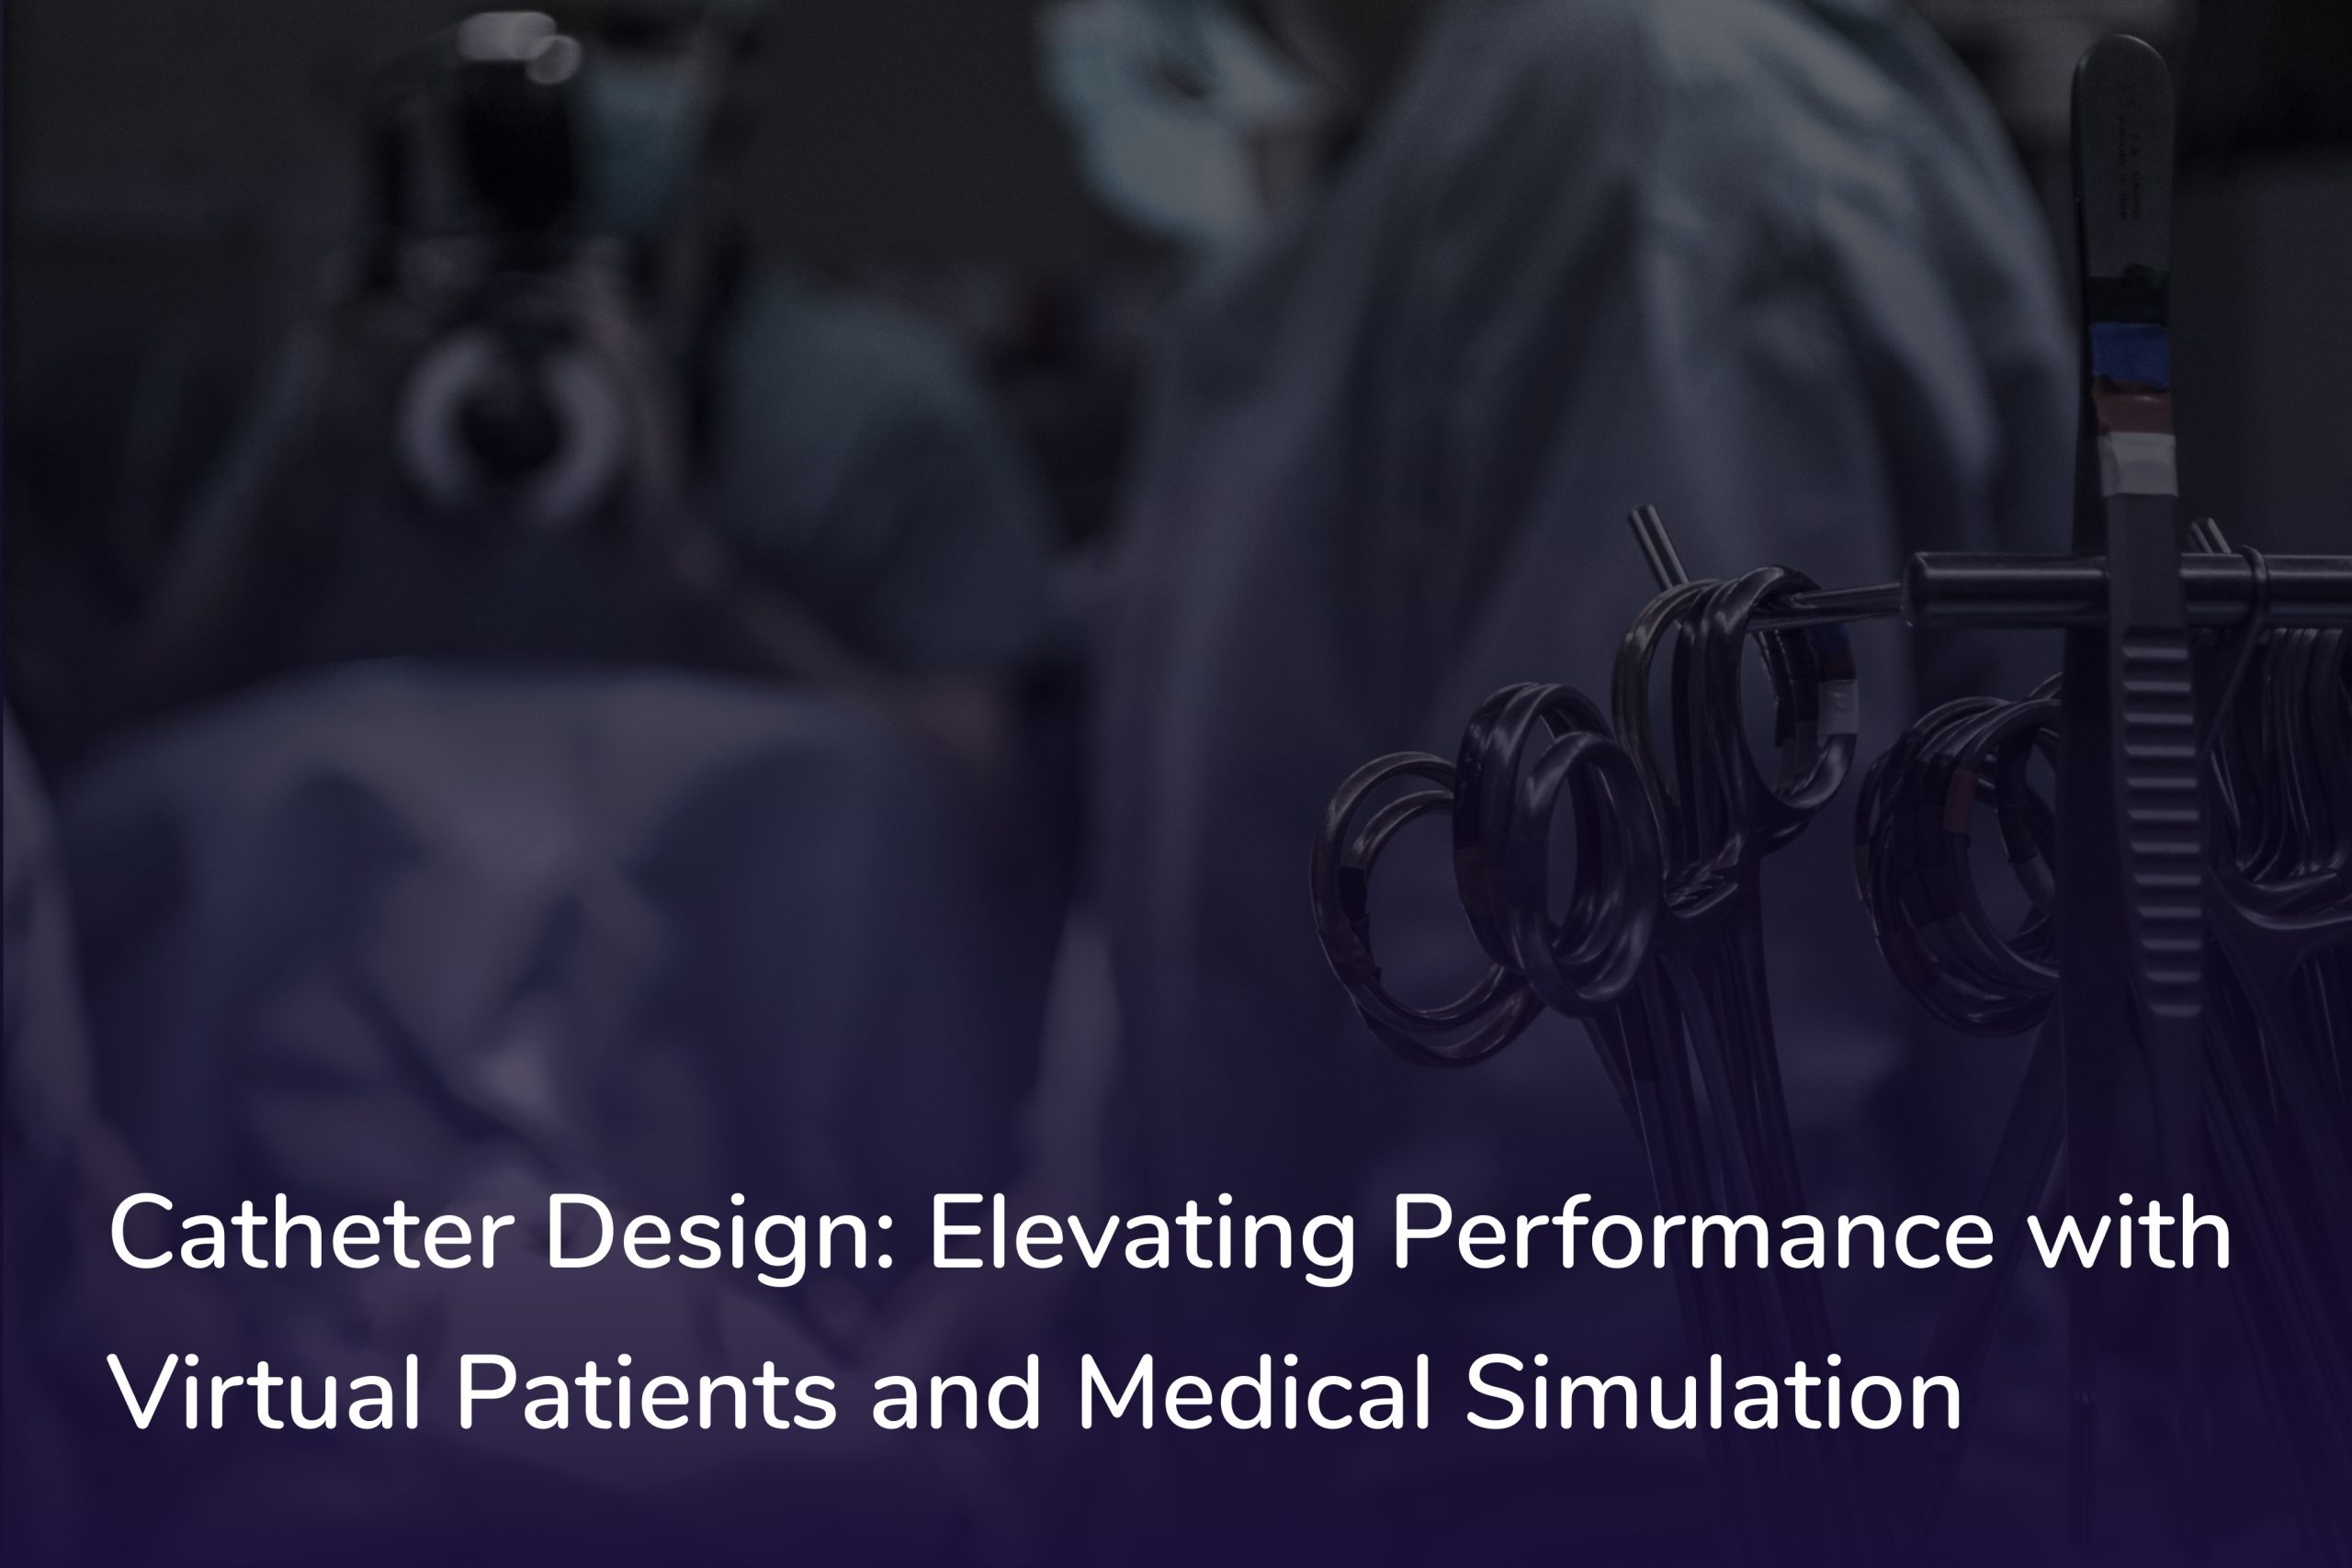 Photo of surgery room with title Catheter Design: Elevating Performance with virtual patients and medical simulation